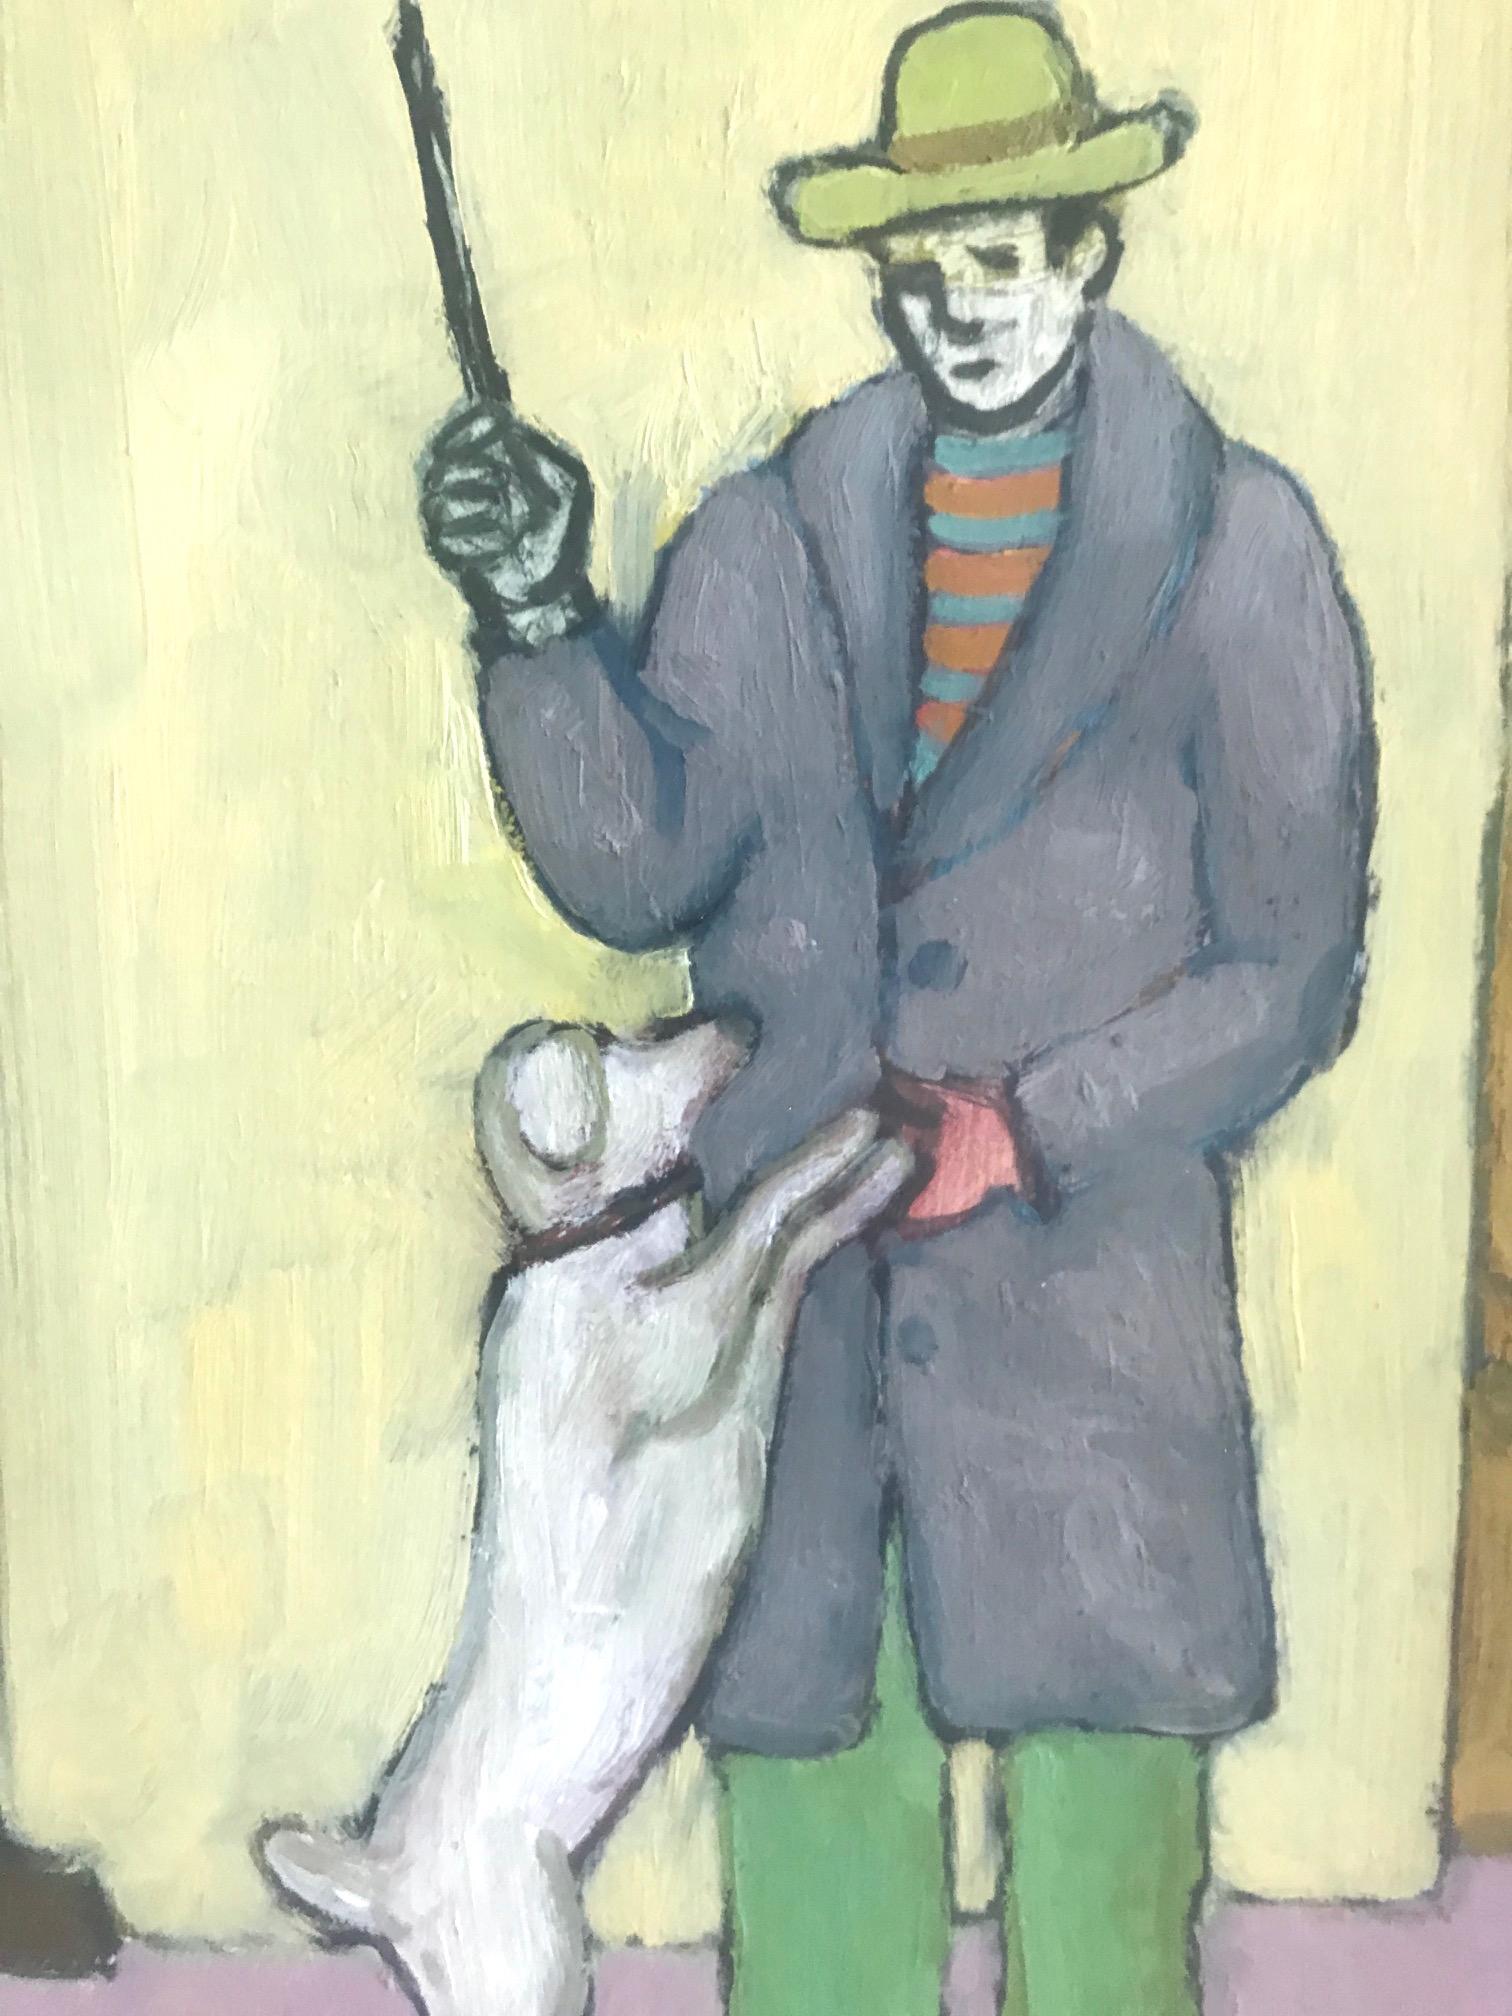 Canvas Man with Dog Oil Painting by Tom Gaines, 2003